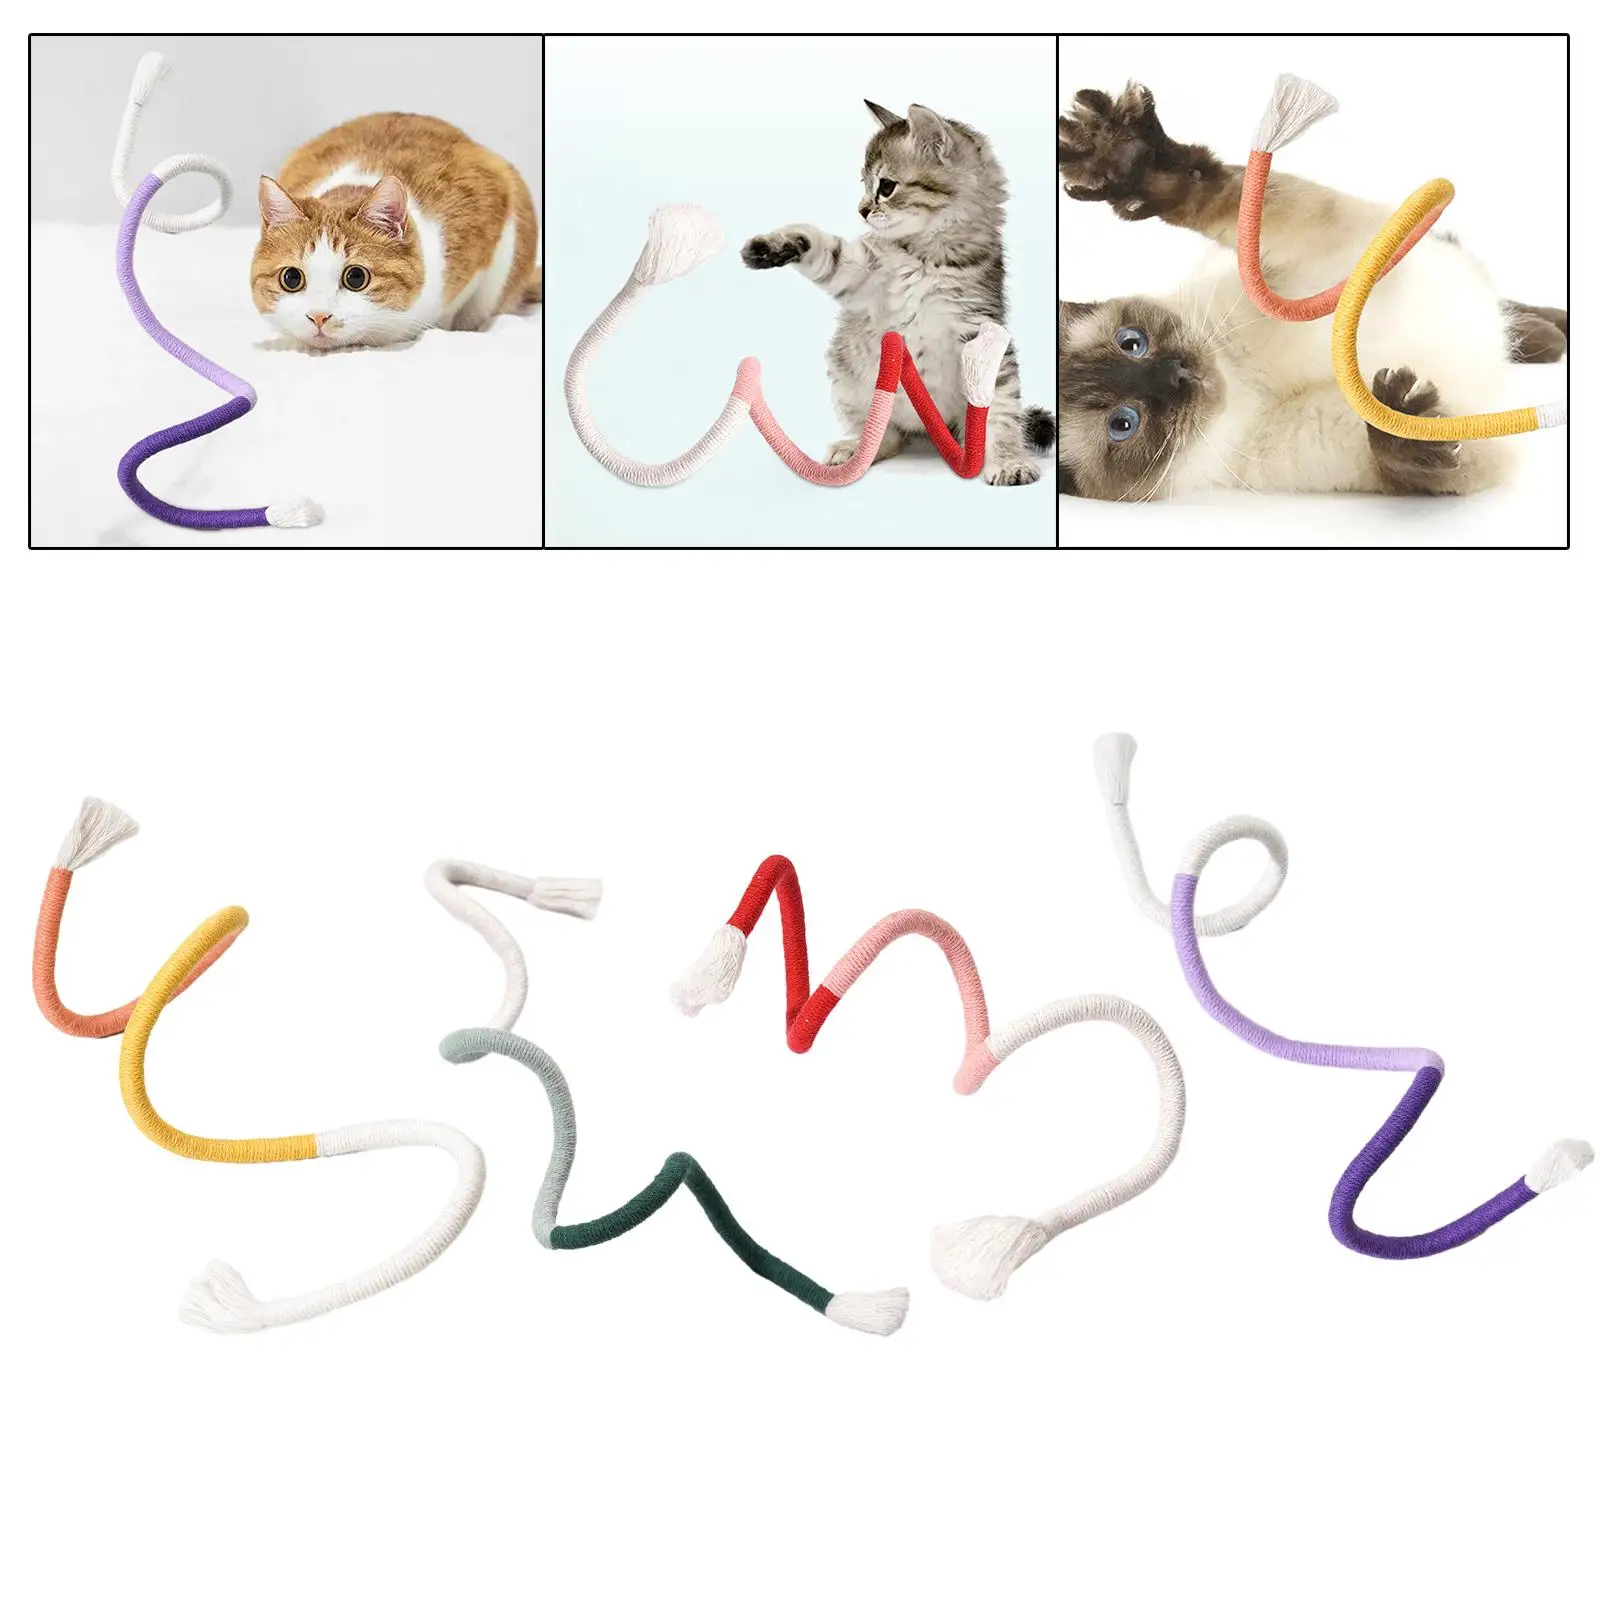 Cat Toy Bite Rope Bite Resistant Indoor Training Interactive Toy Funny Multifunction for Small Animals Puppy Kitten Supplies